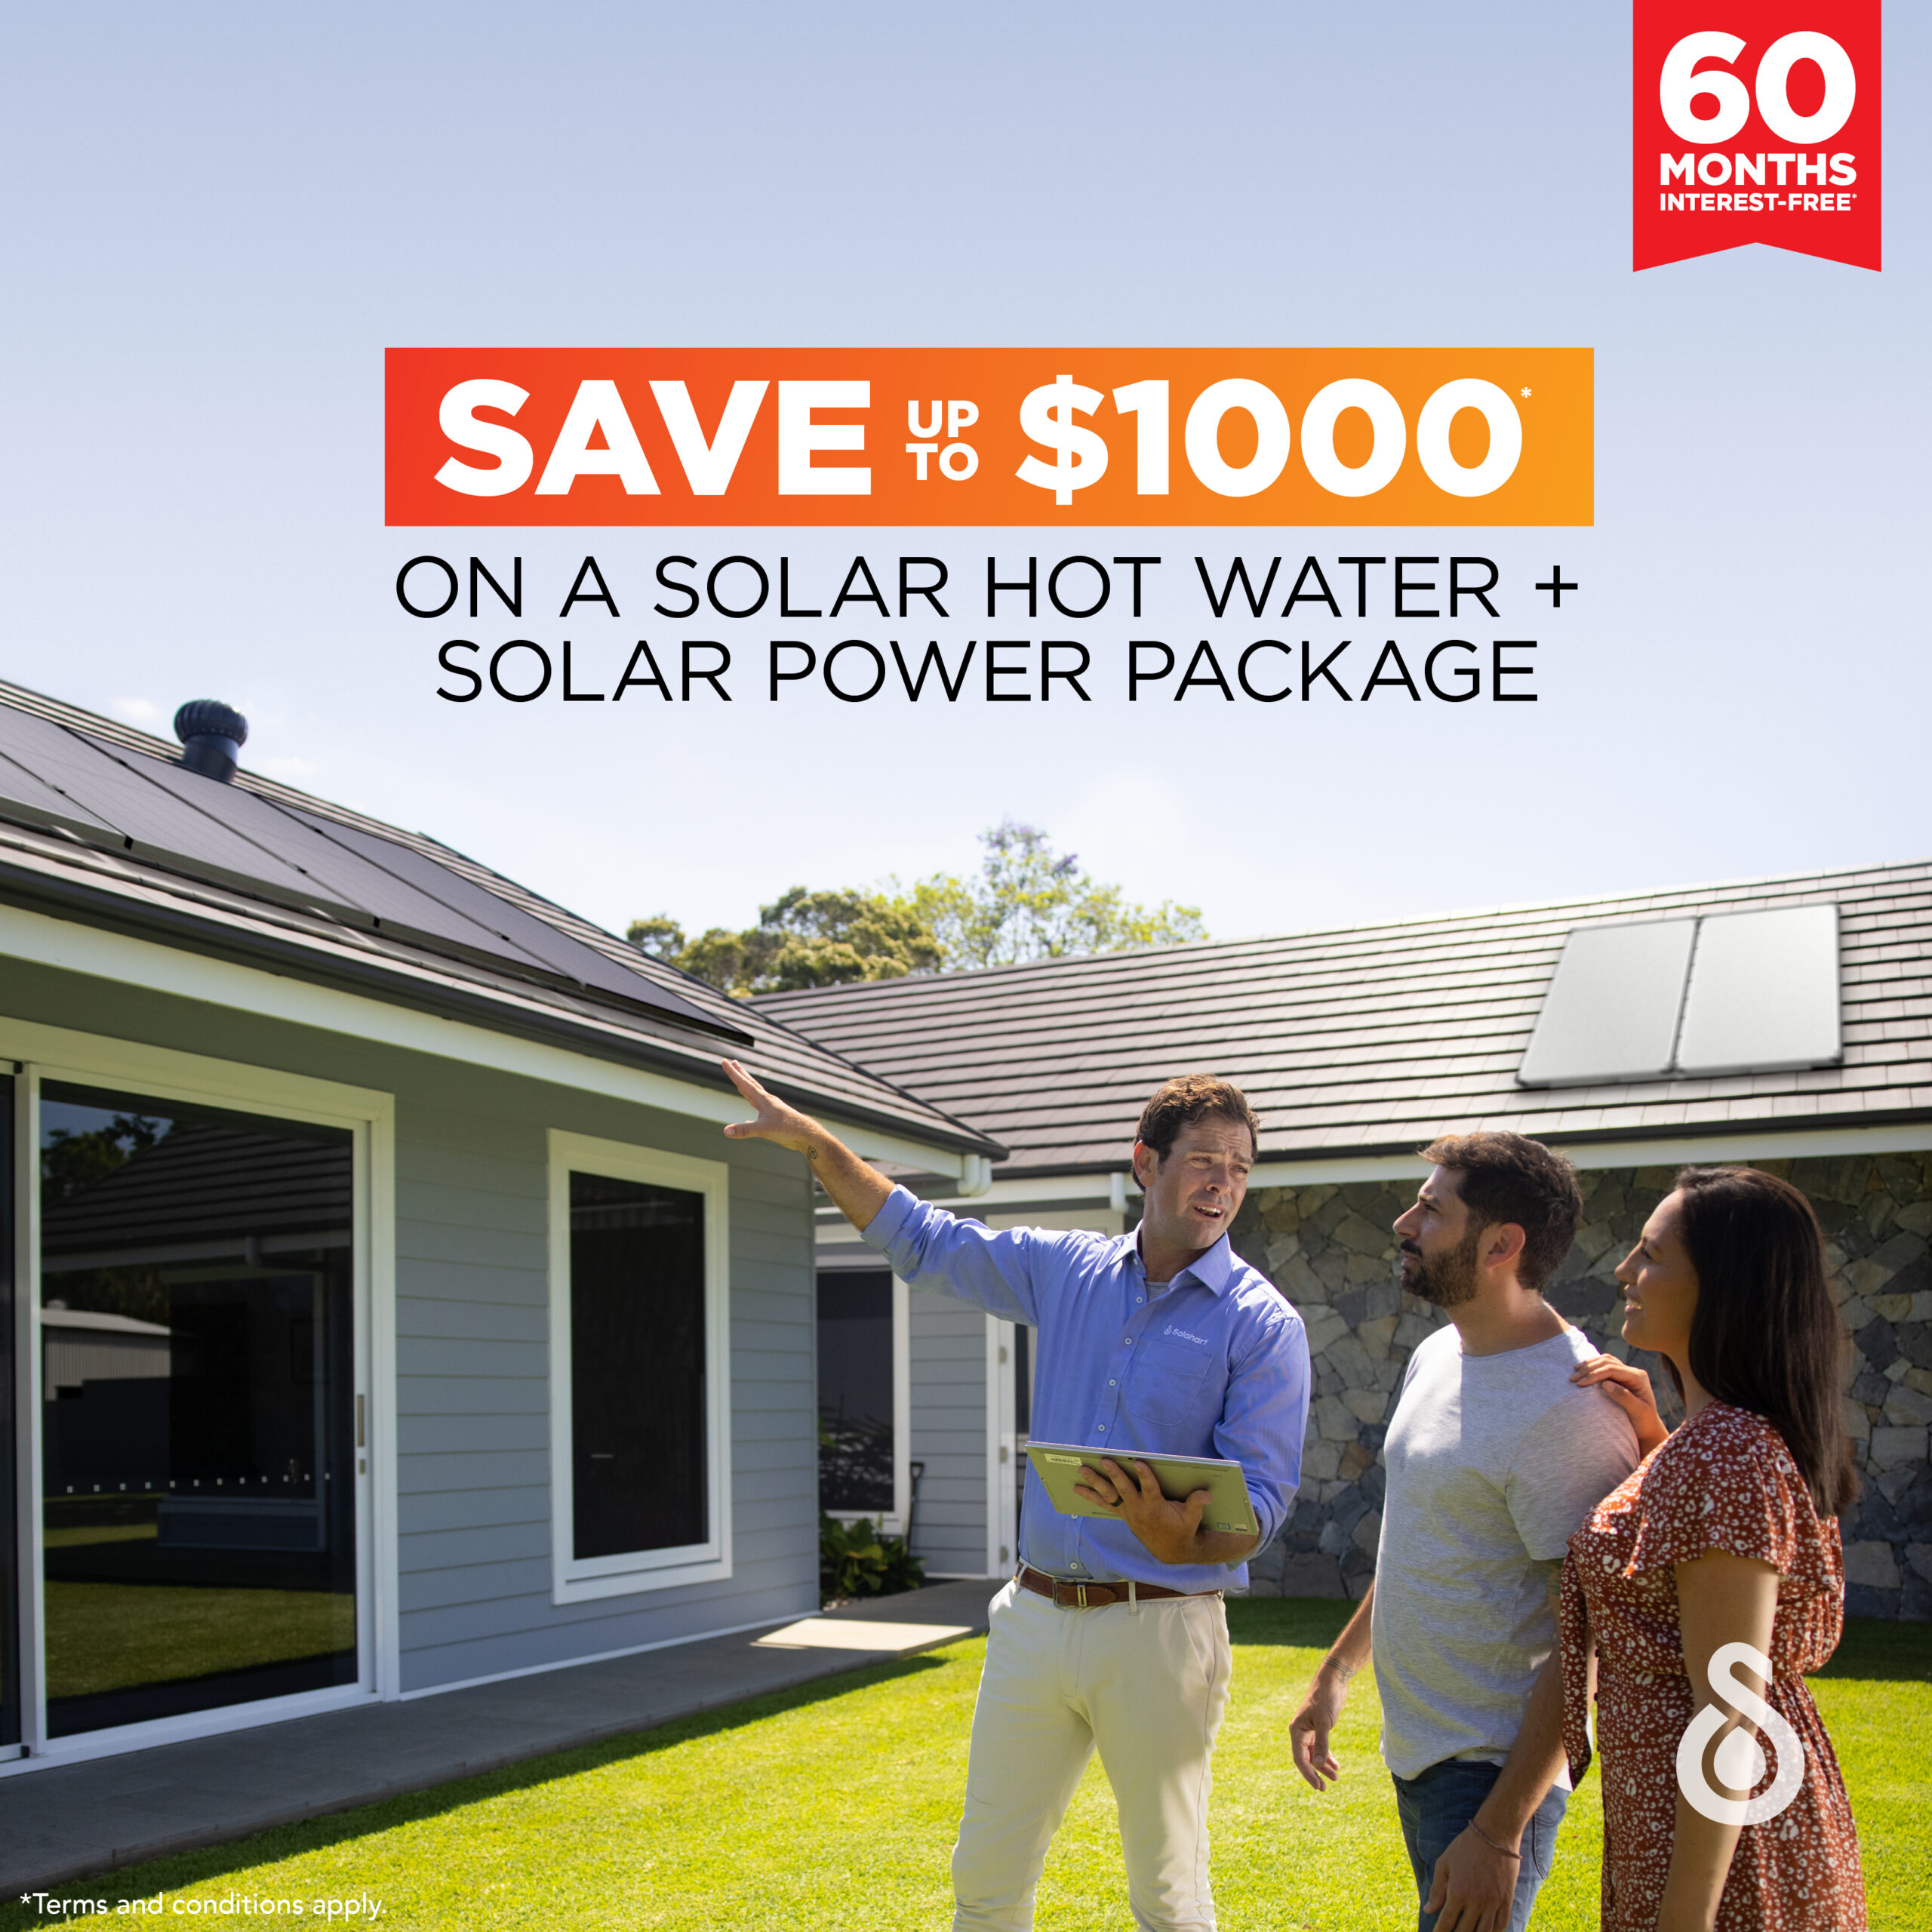 Offer from Solahart for 60 months interest-free on their solar power system. 